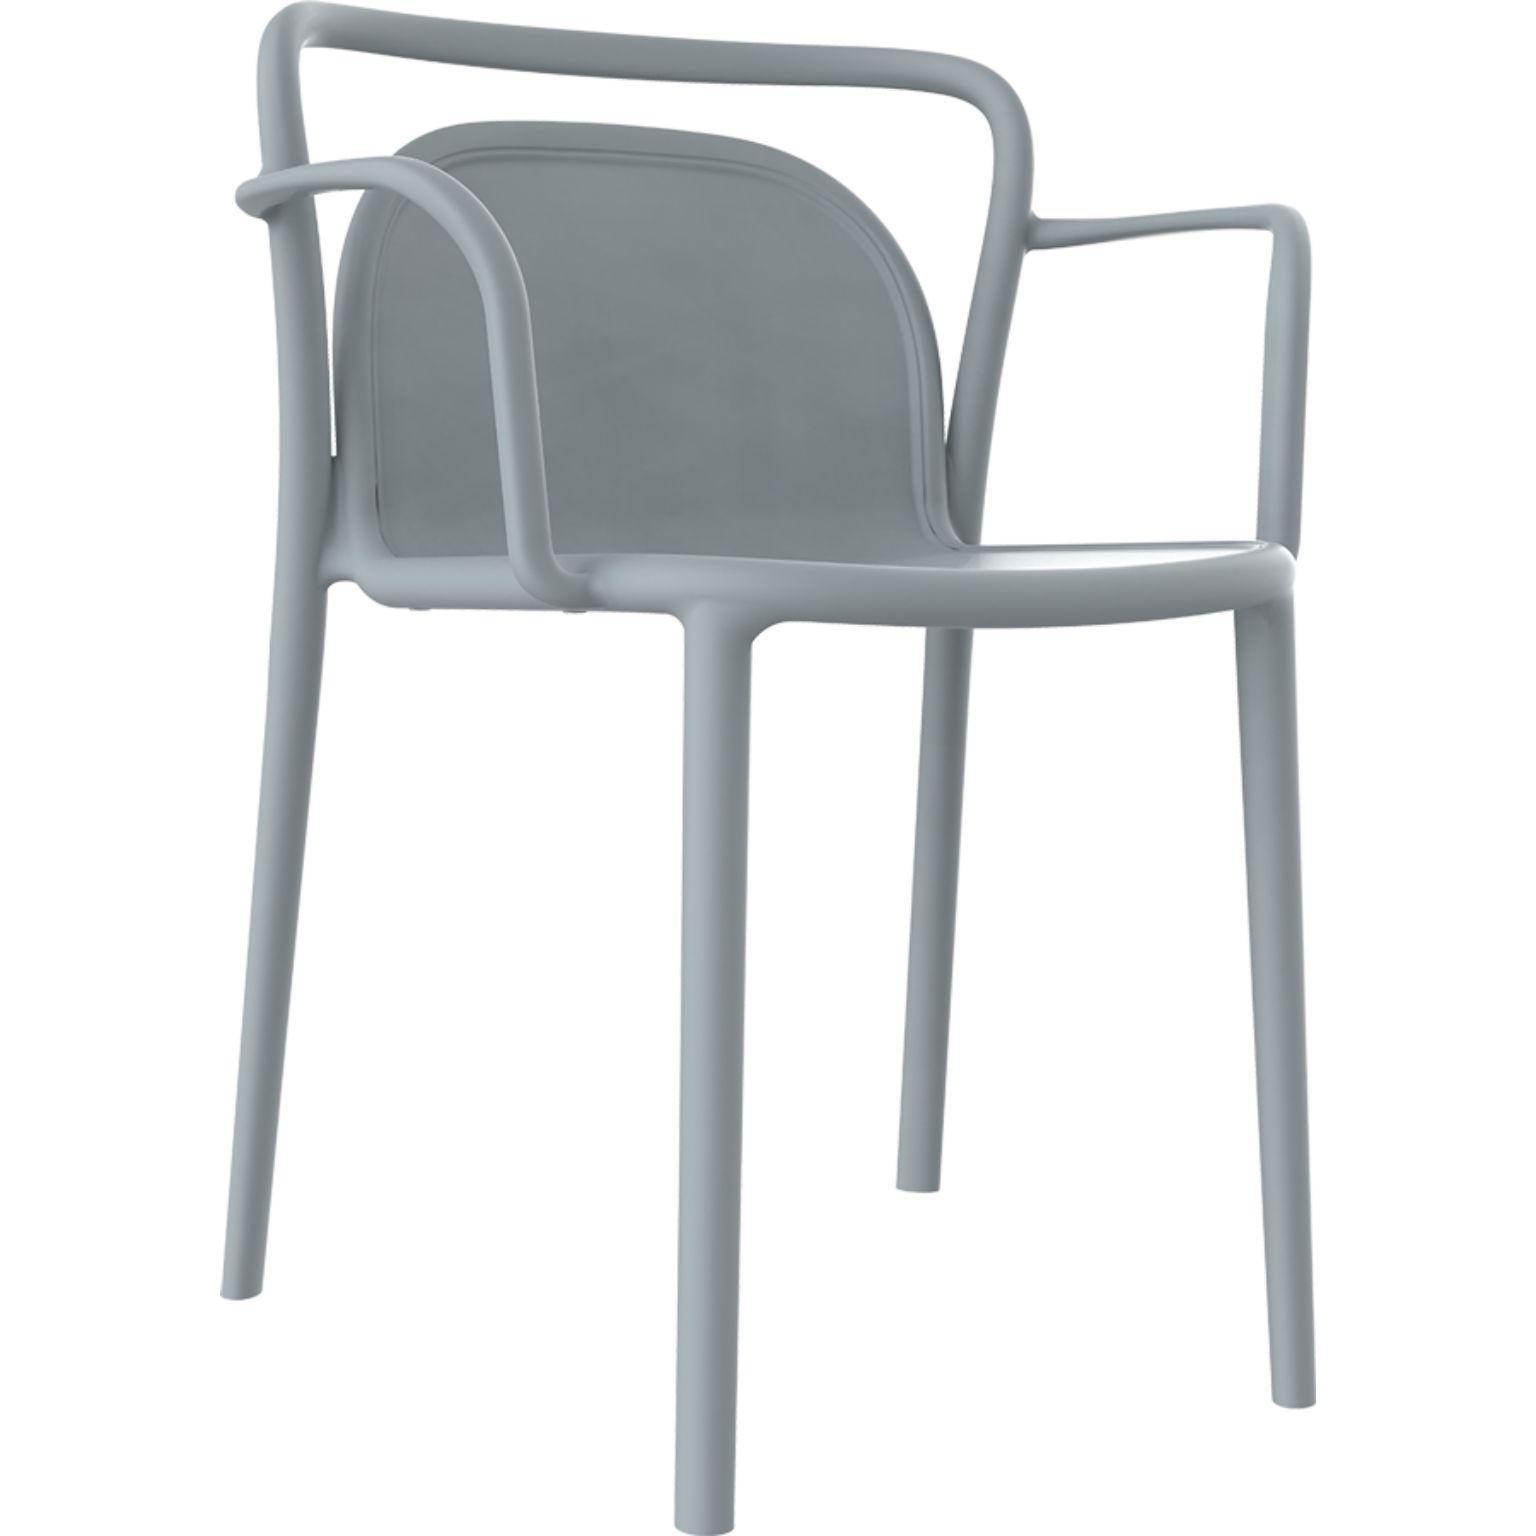 Set of 4 classe grey chairs by Mowee.
Dimensions: D52 x W52 x H77 cm (Seat Height 45 cm).
Material: Polypropylene resin with fiberglass.
Weight: 4.6 kg
Also available in different colors. An optional cushion can be added. 

Classe is a chair